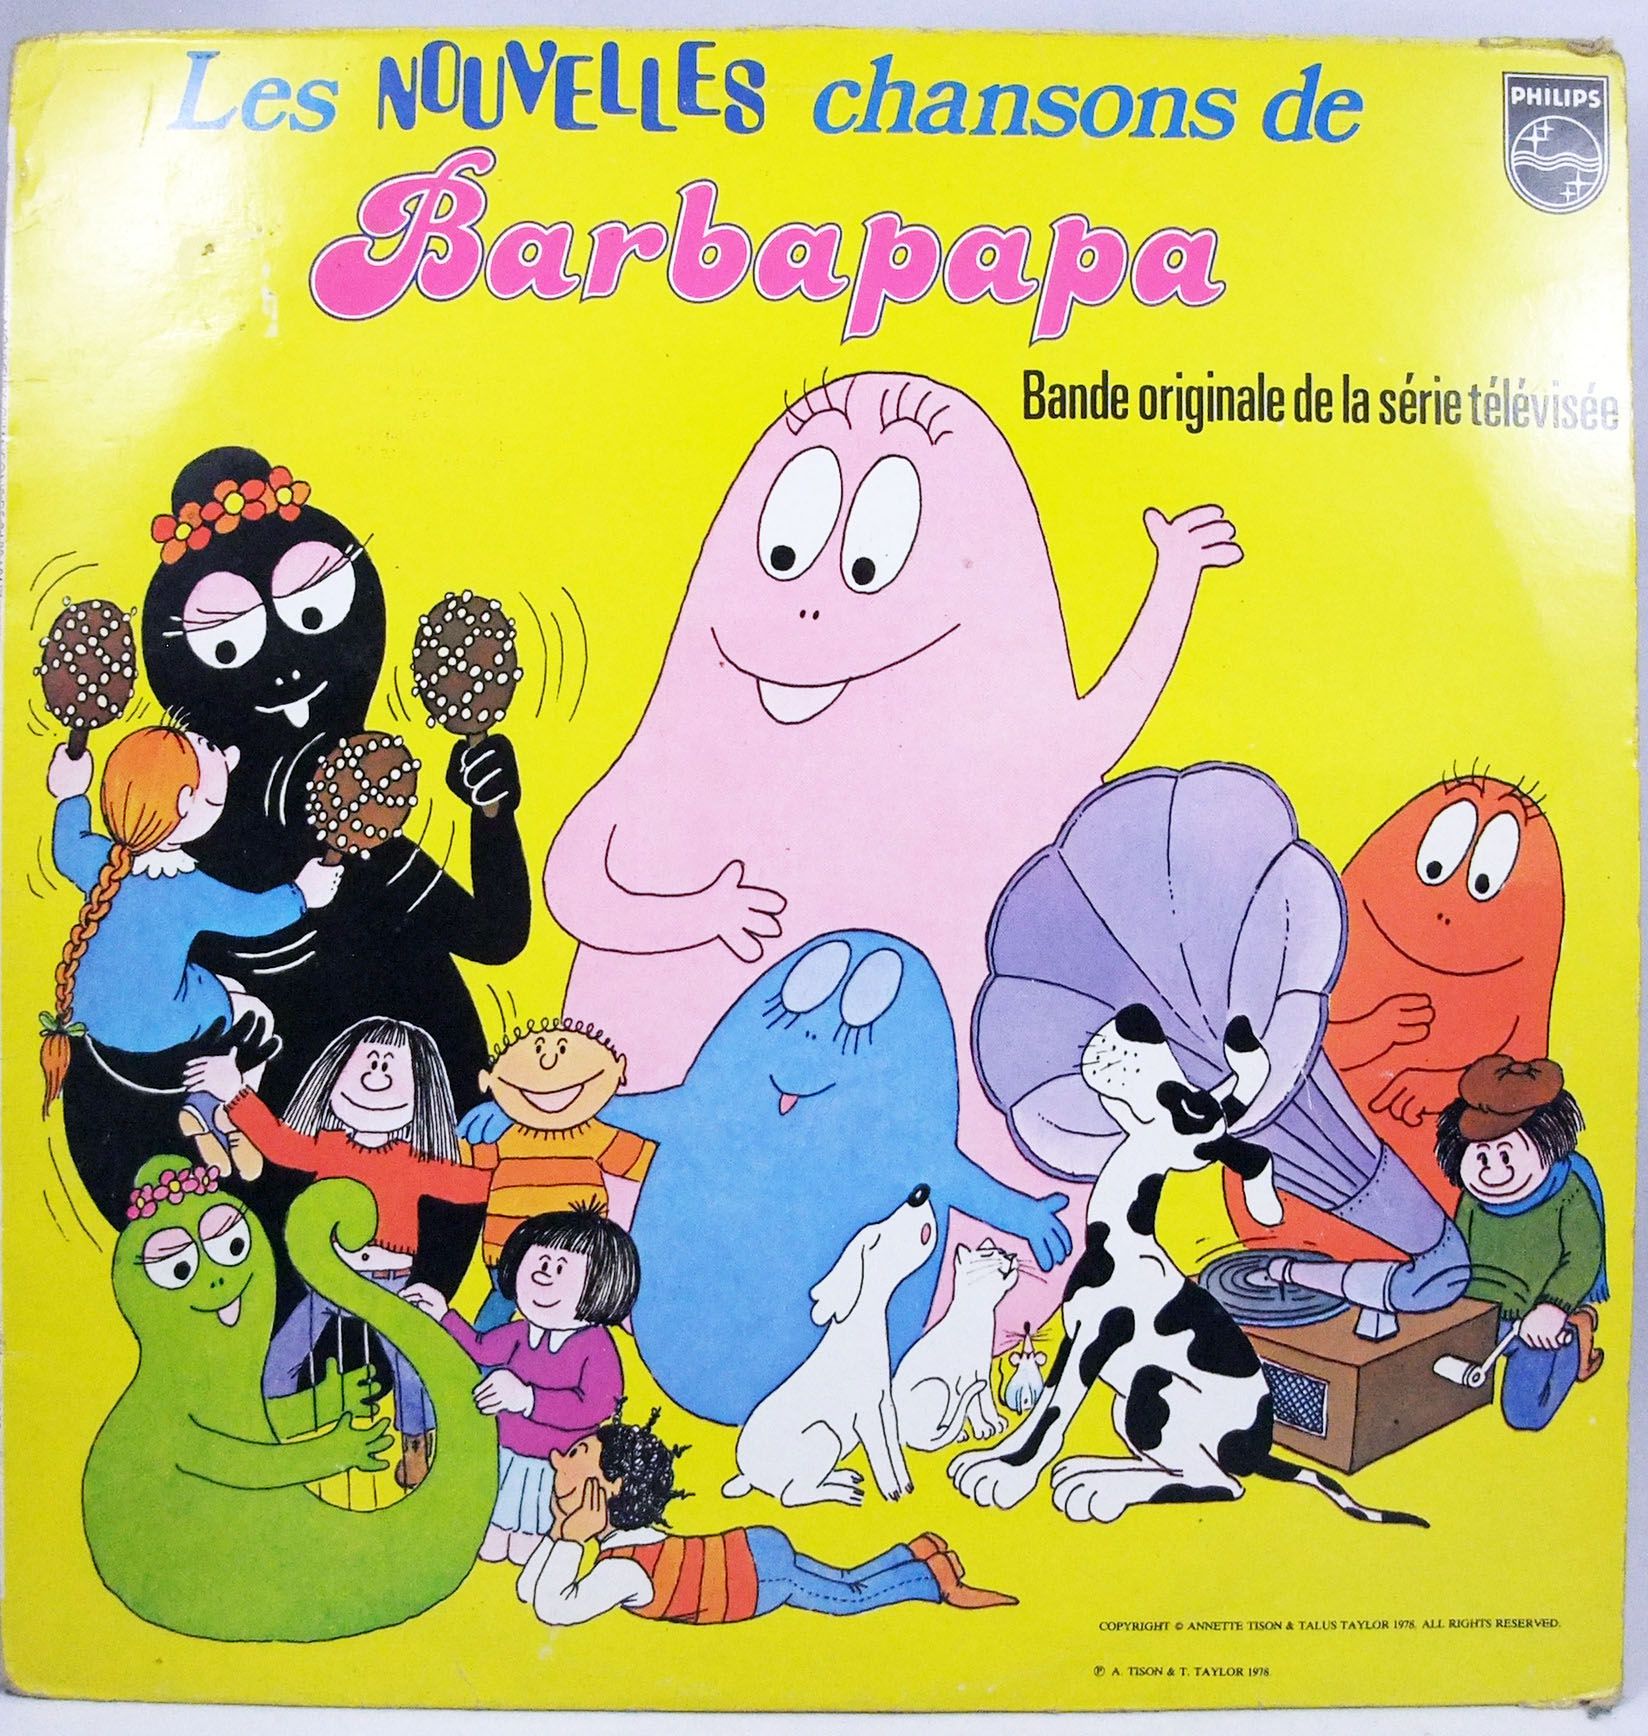 The New Songs of Barbapapa - LP Record - Original French TV series  Soundtrack - Philips Records 1978